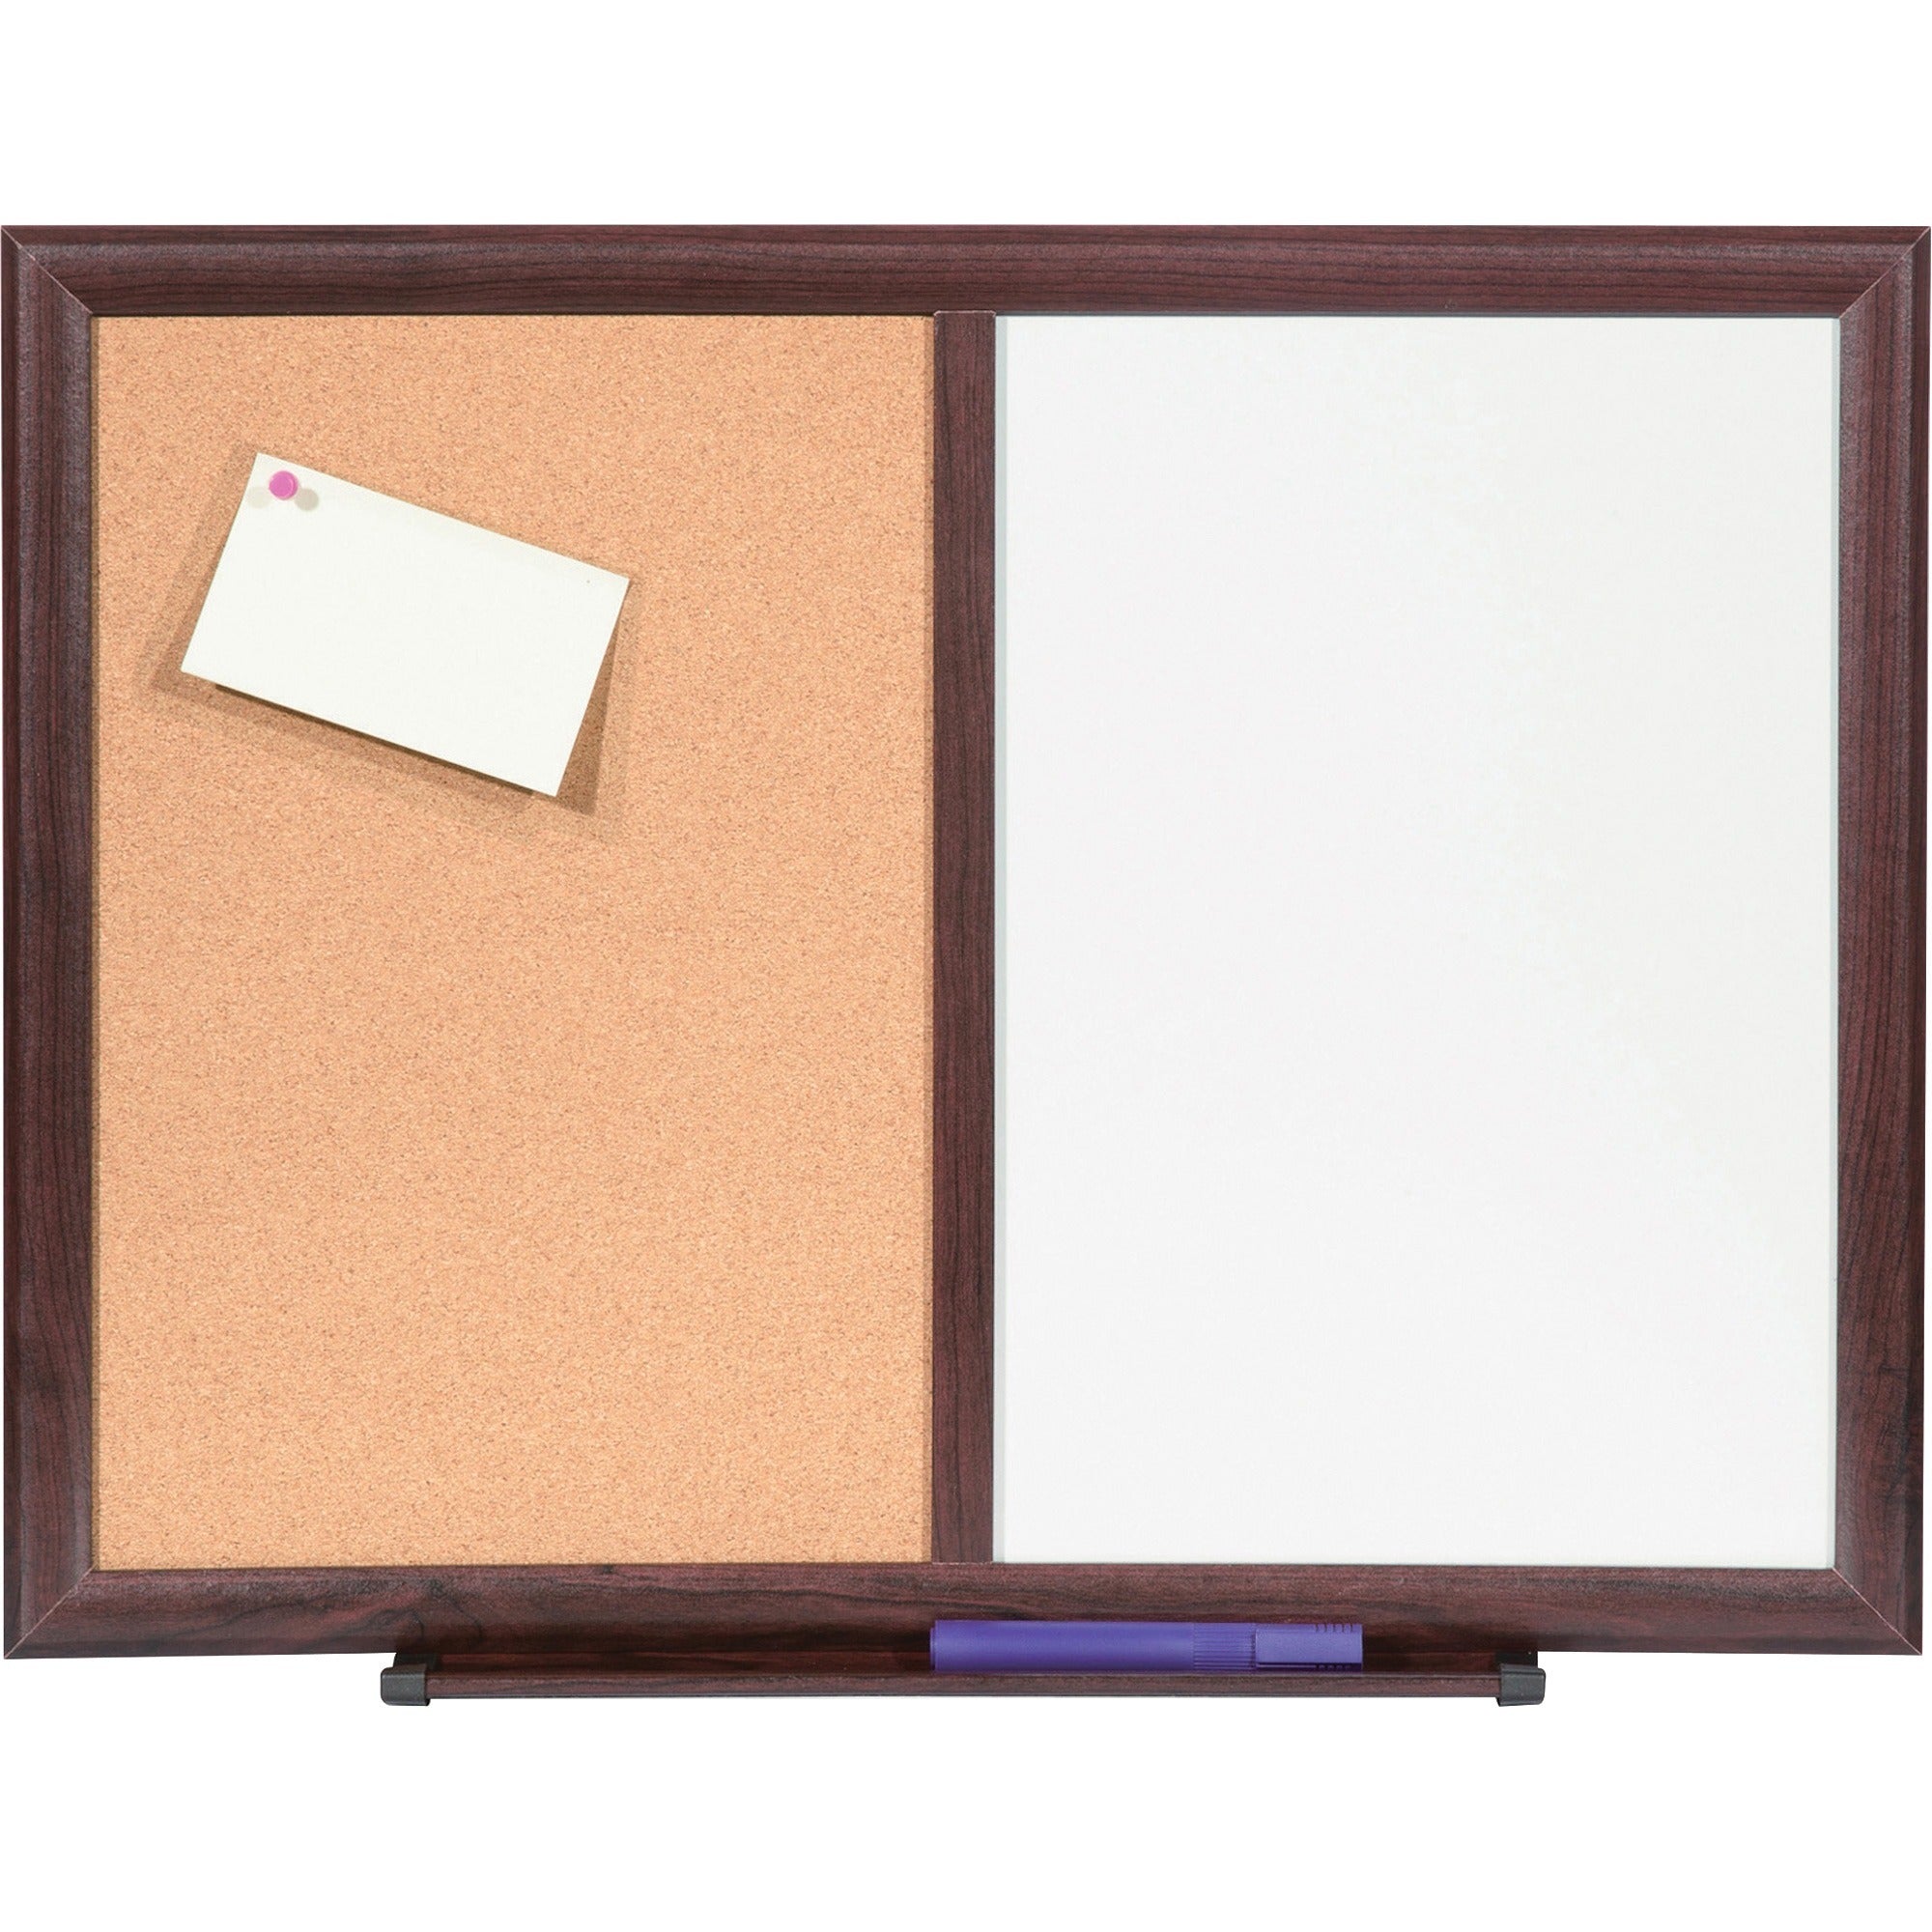 Lorell Combo Dry-Erase/Cork Board - 24" (2 ft) Width x 18" (1.5 ft) Height - Melamine Surface - Mahogany Wood Frame - 1 Each - 